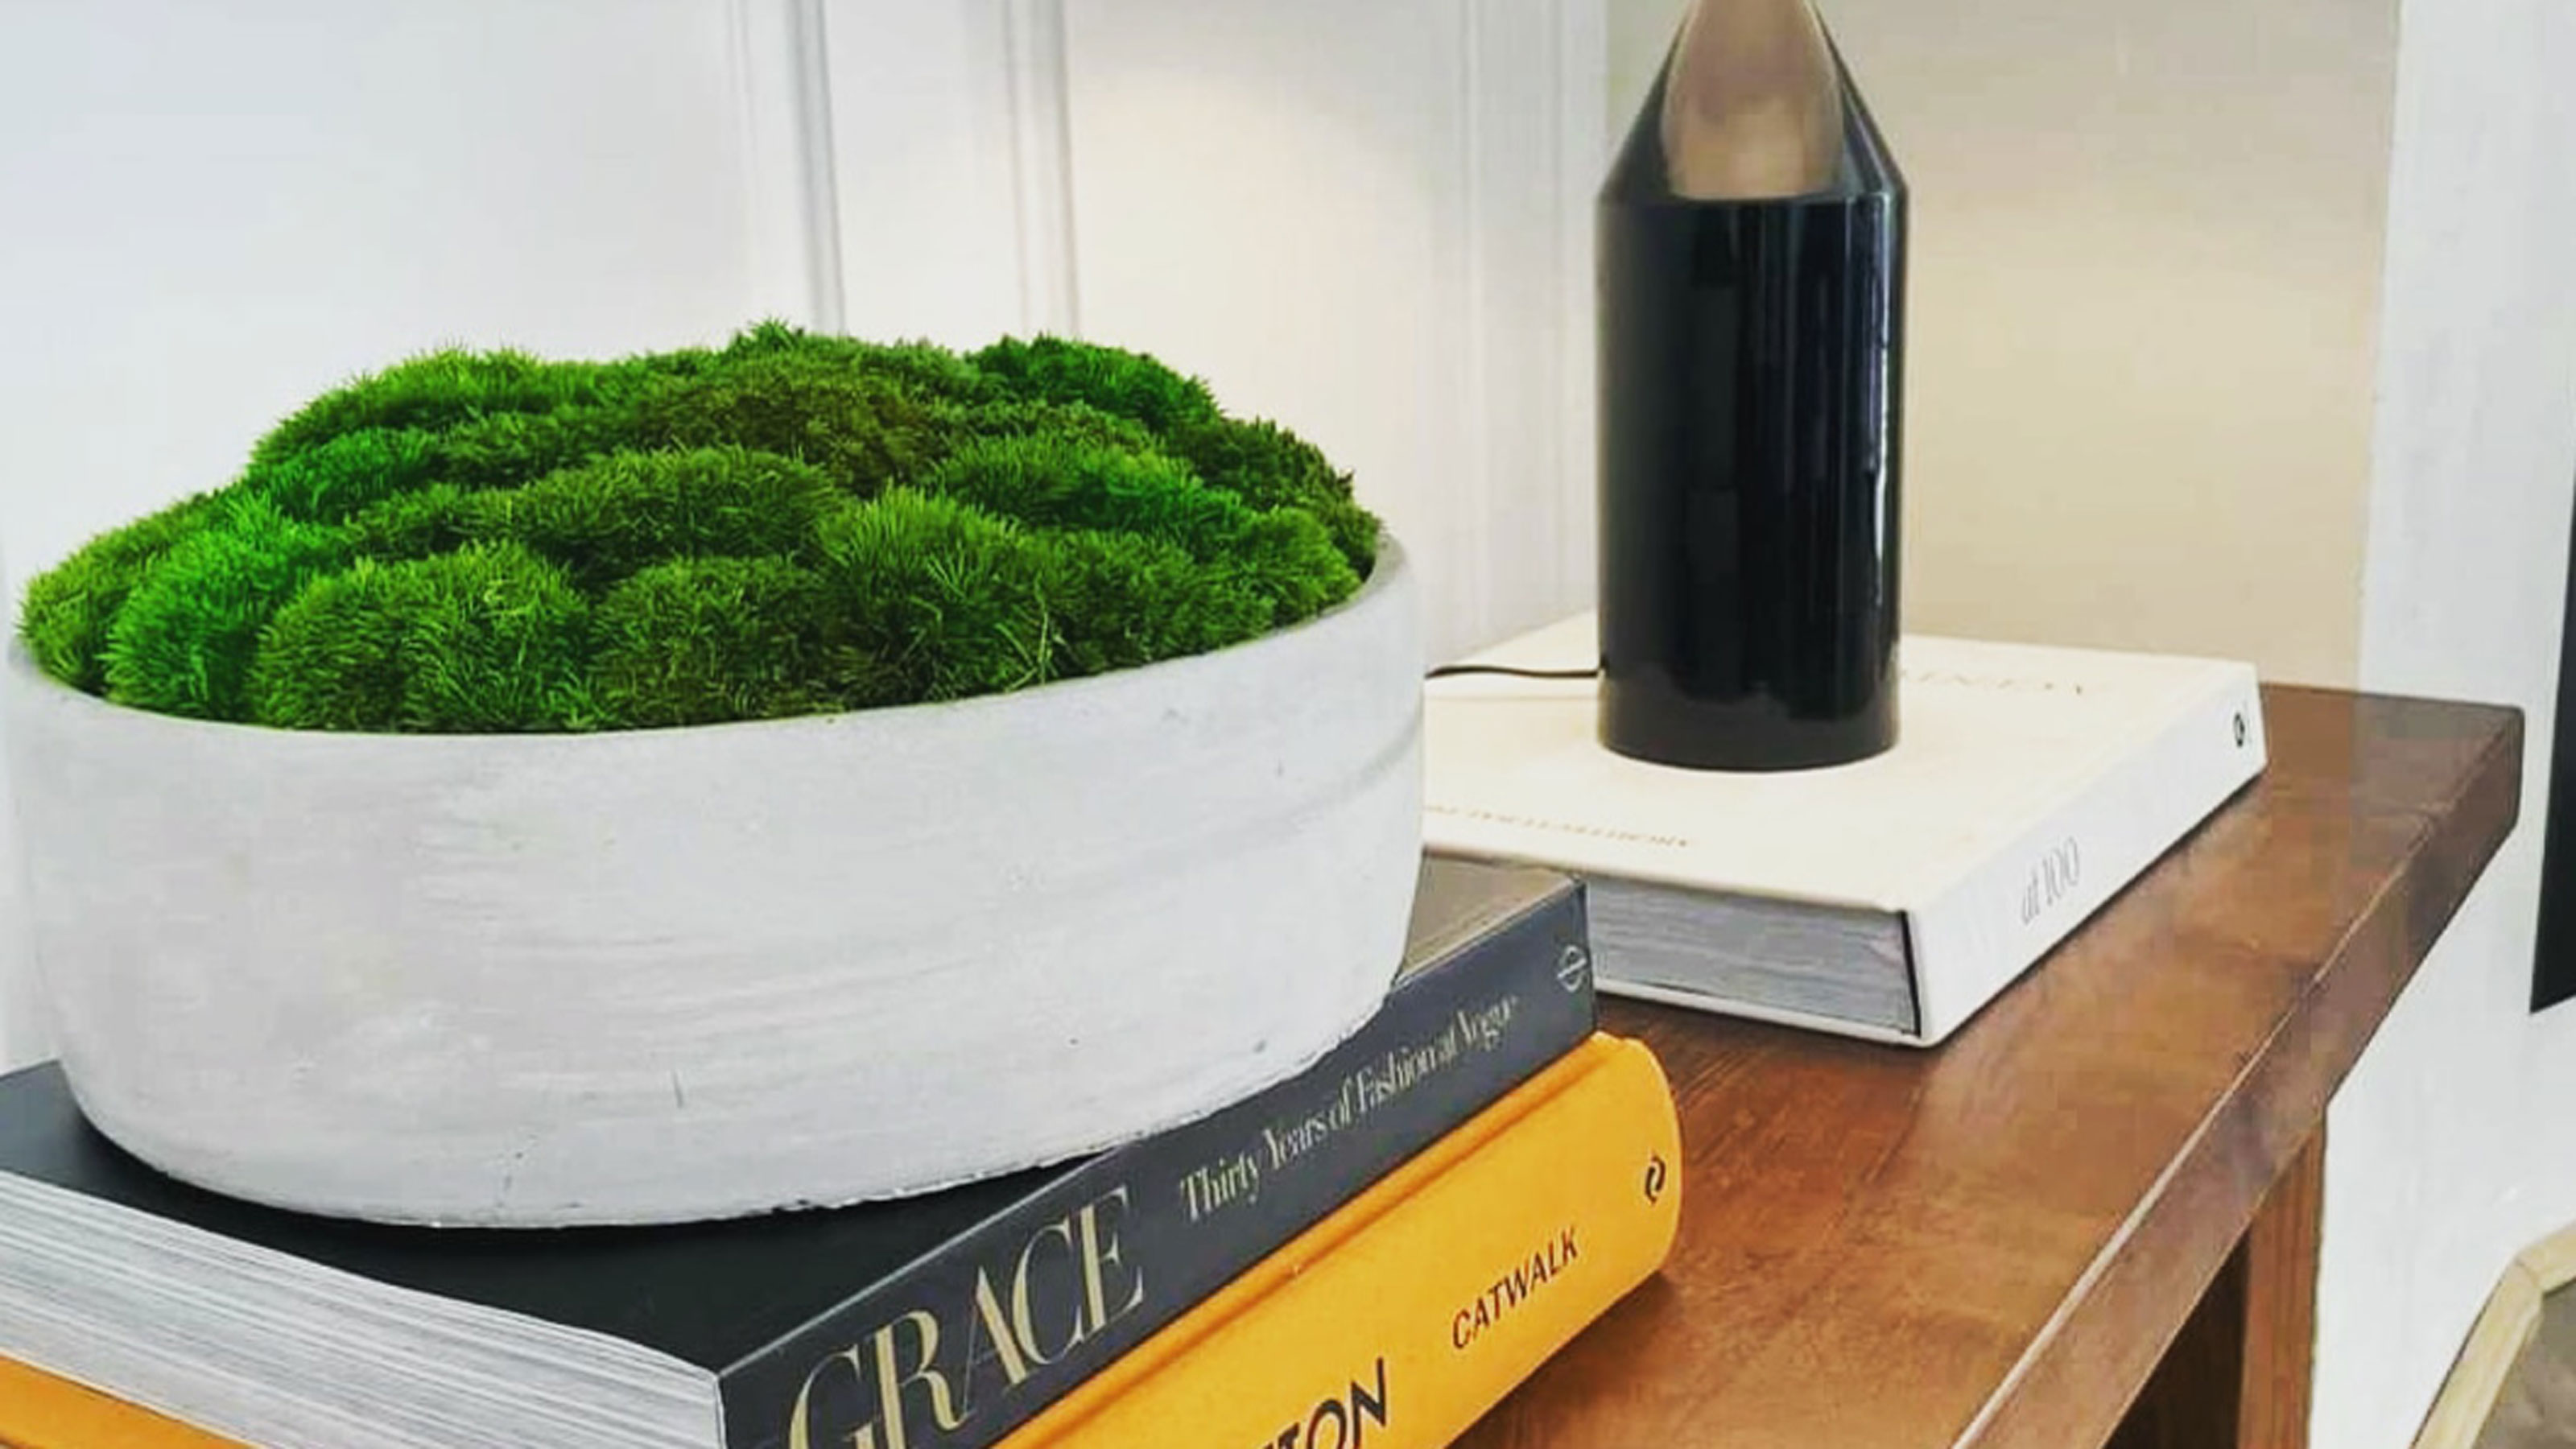 Moss bowl trend - everything you need to know